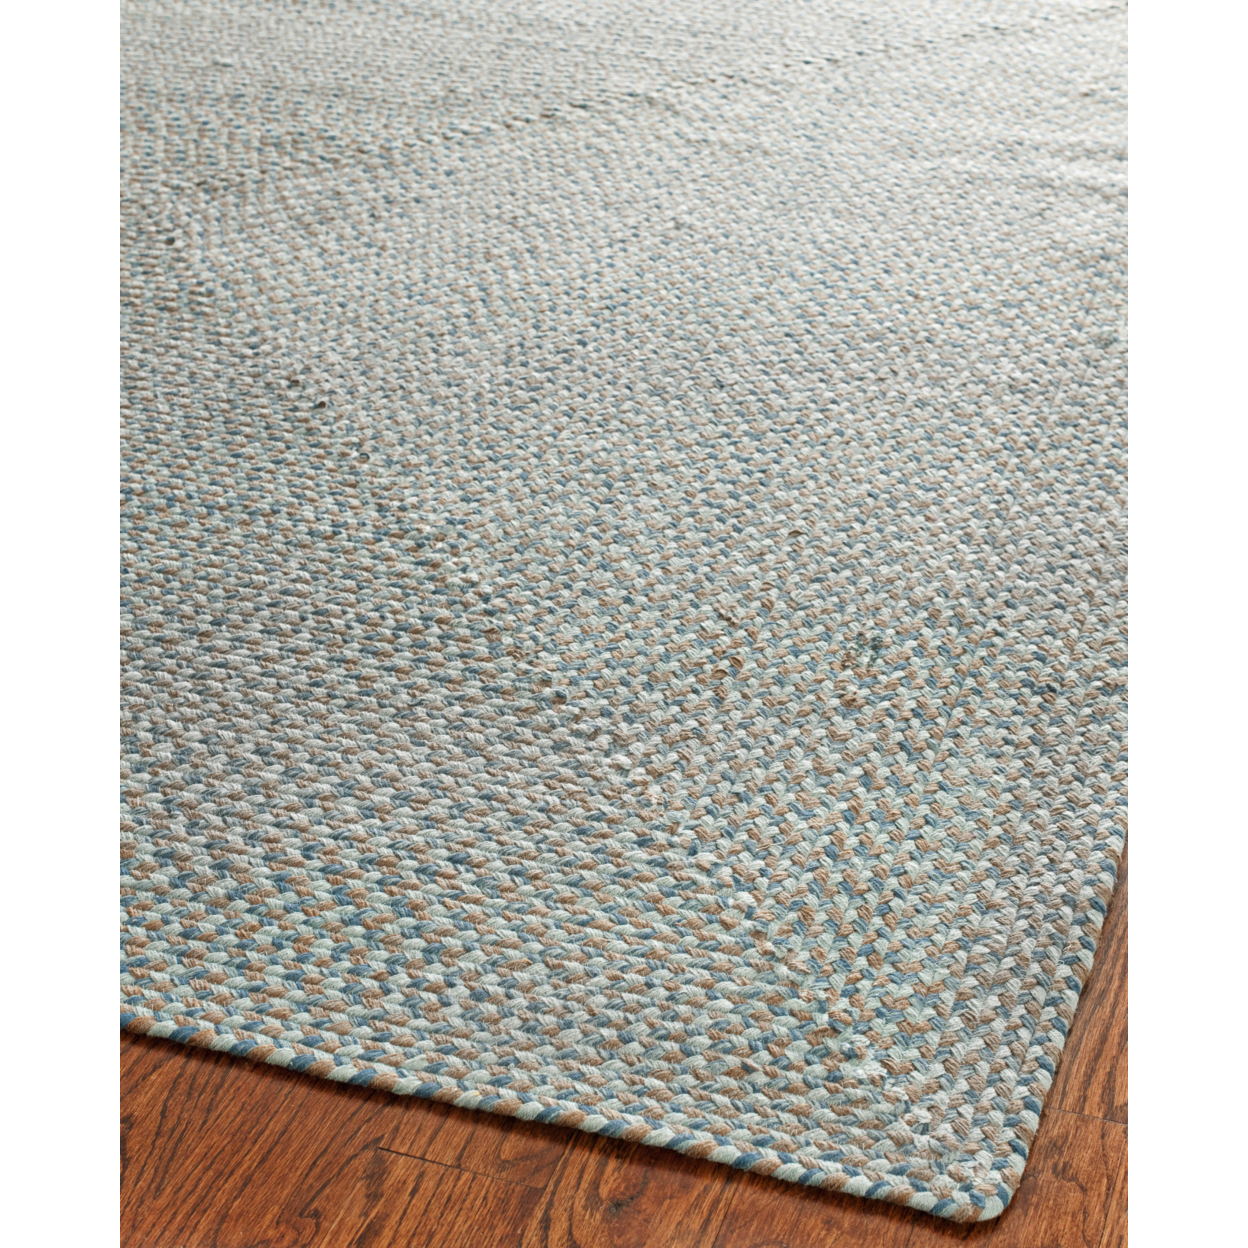 SAFAVIEH Braided Collection BRD170A Handwoven Multi Rug - 4' X 6'